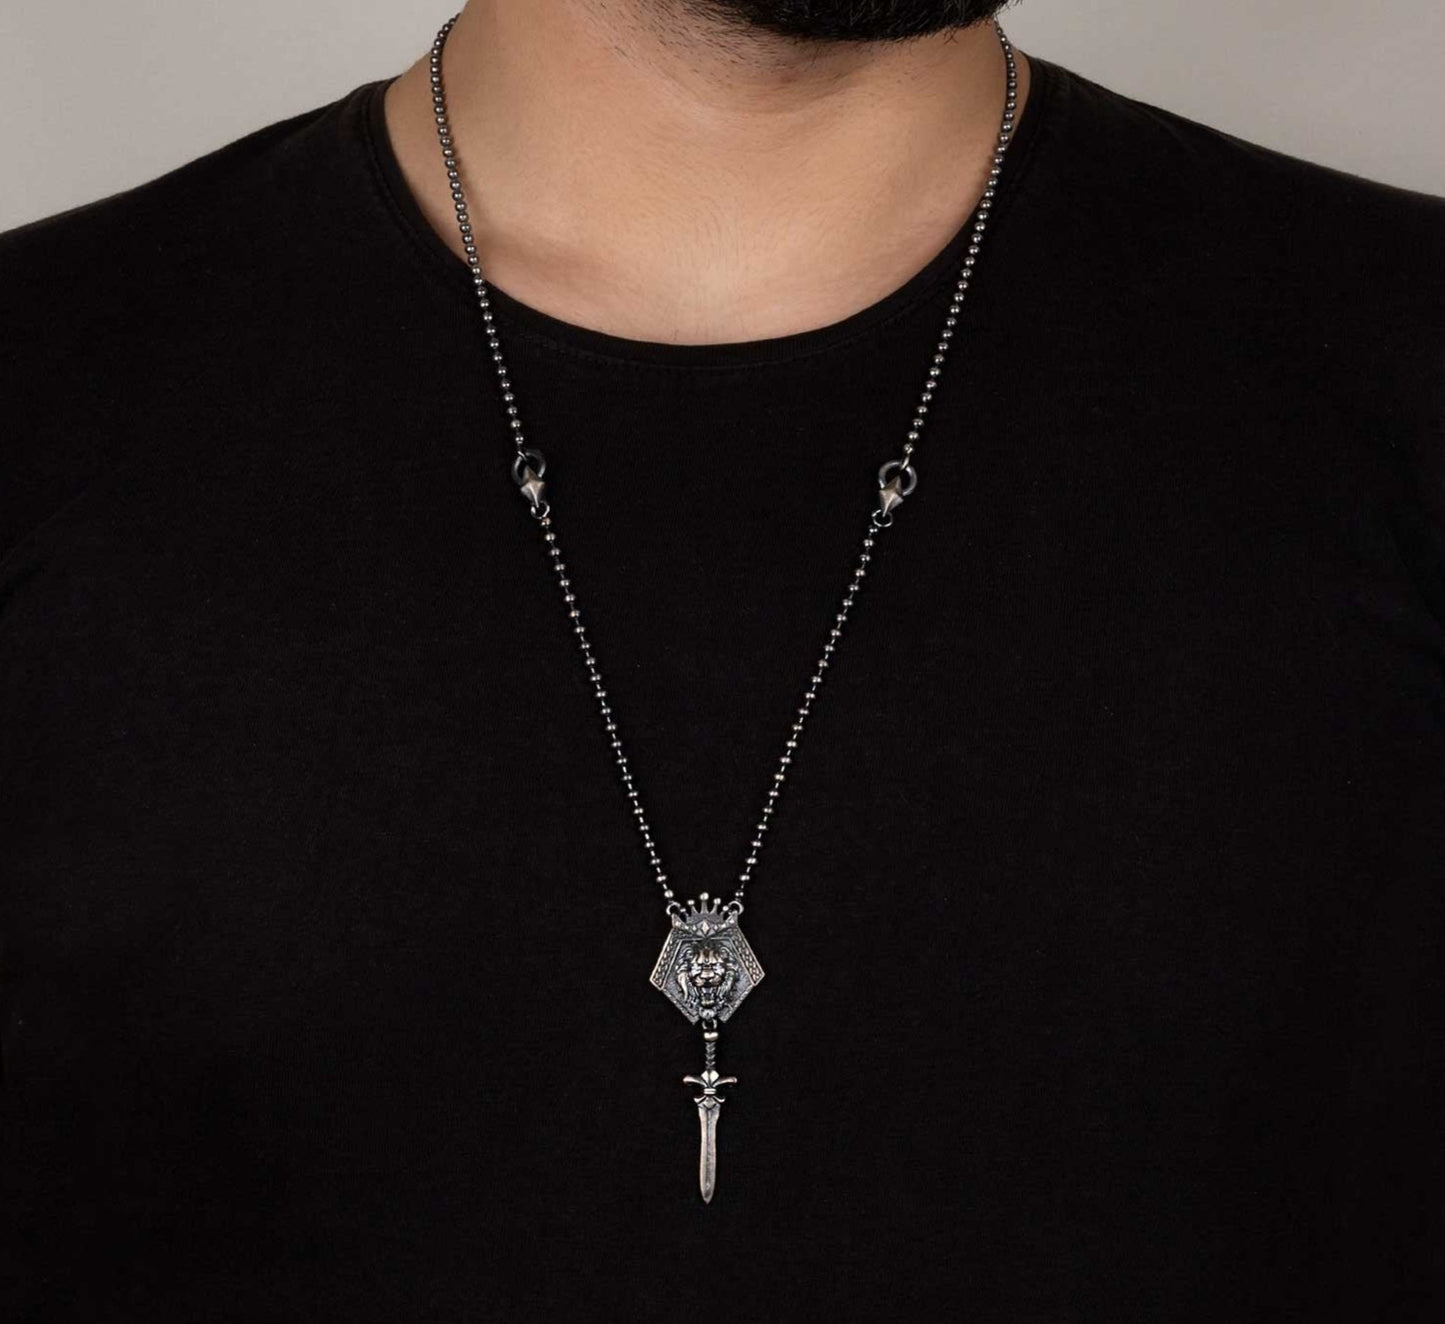 RARE PRINCE by CARAT SUTRA | Unique Designed King Lion with Sword Pendant Necklace with Ball Chain | 925 Sterling Silver Oxidized Necklace | Men's Jewelry | With Certificate of Authenticity and 925 Hallmark - caratsutra